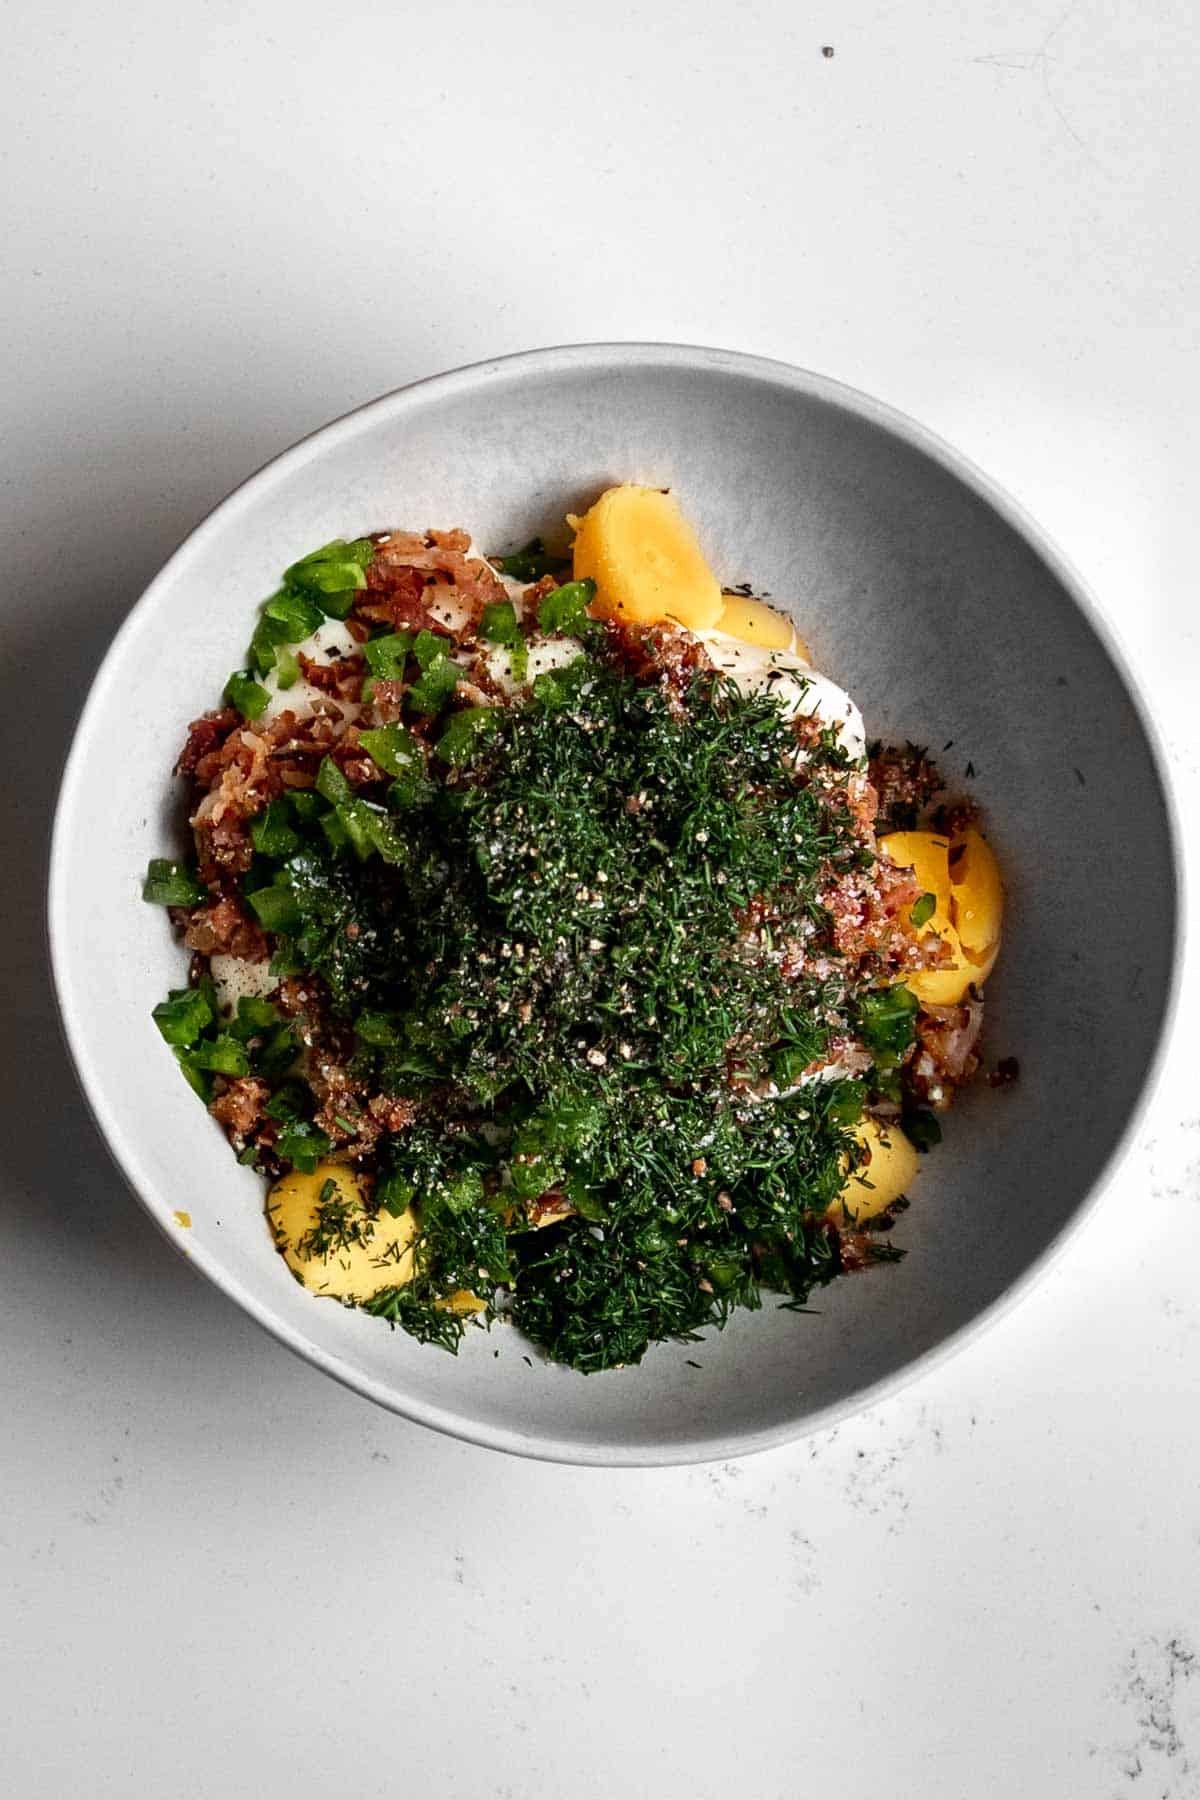 egg yolks, bacon, jalapeno, dill and back pepper in a bowl.